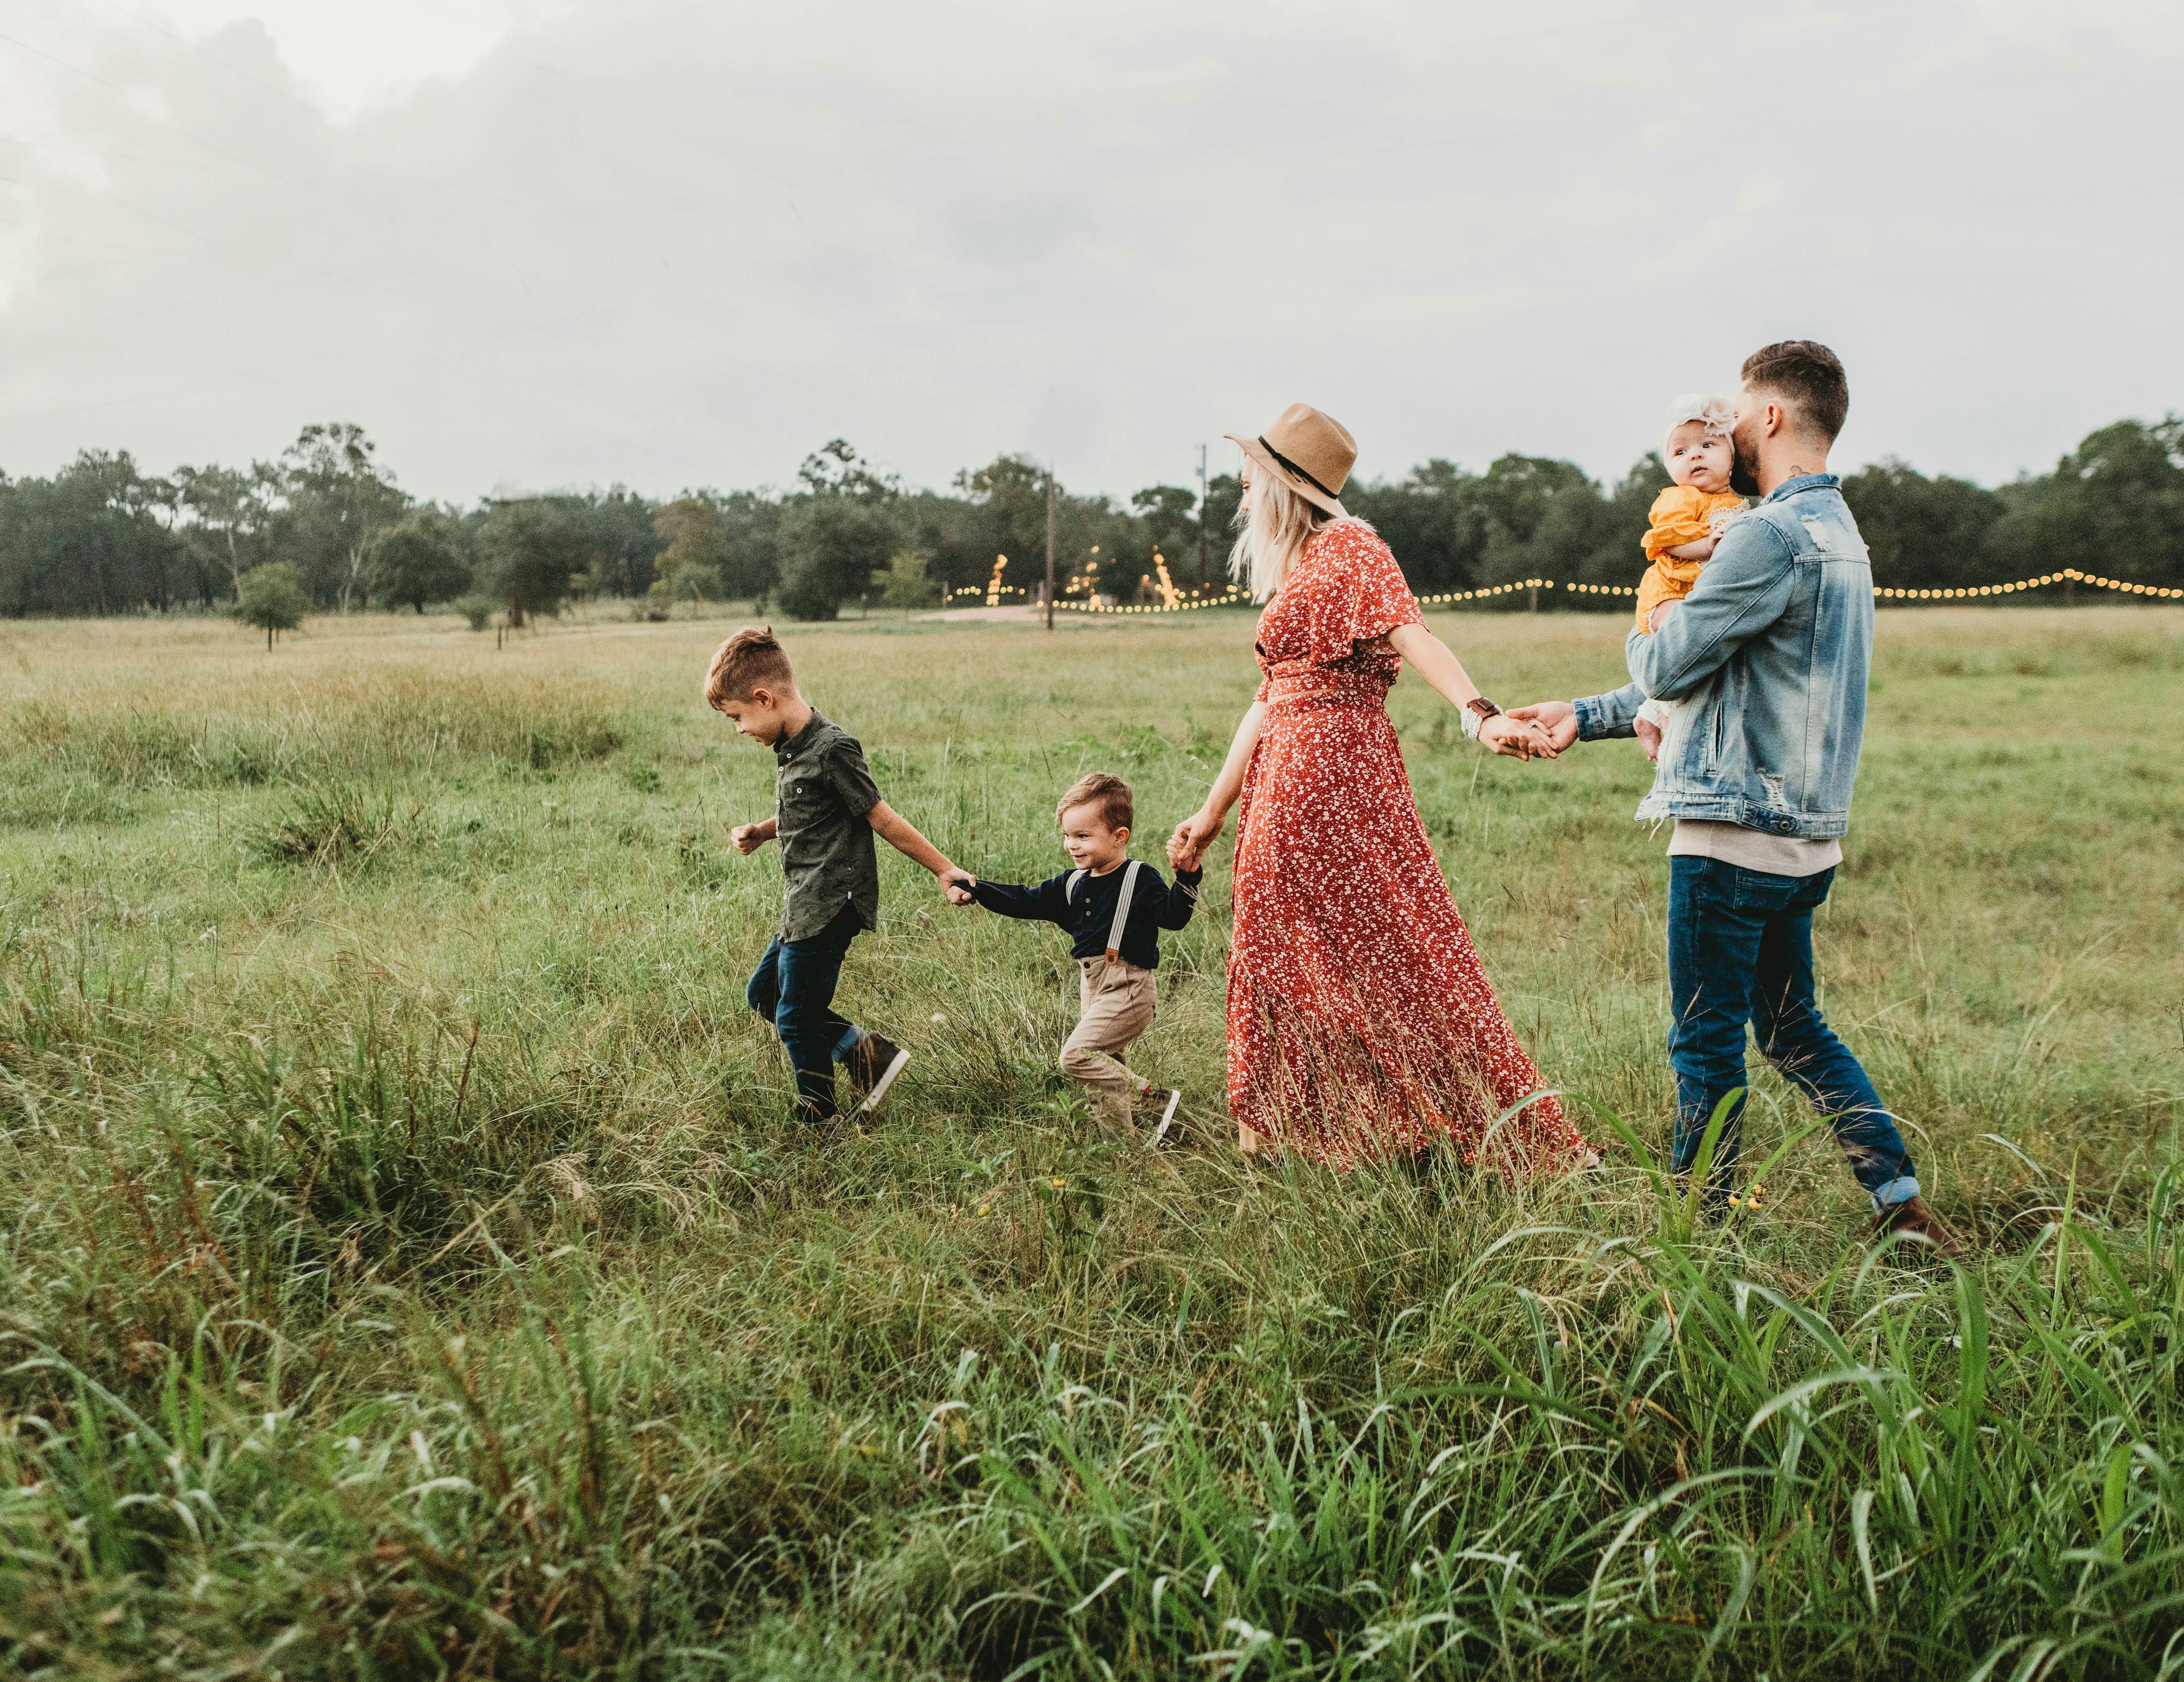 A family walking together in a field